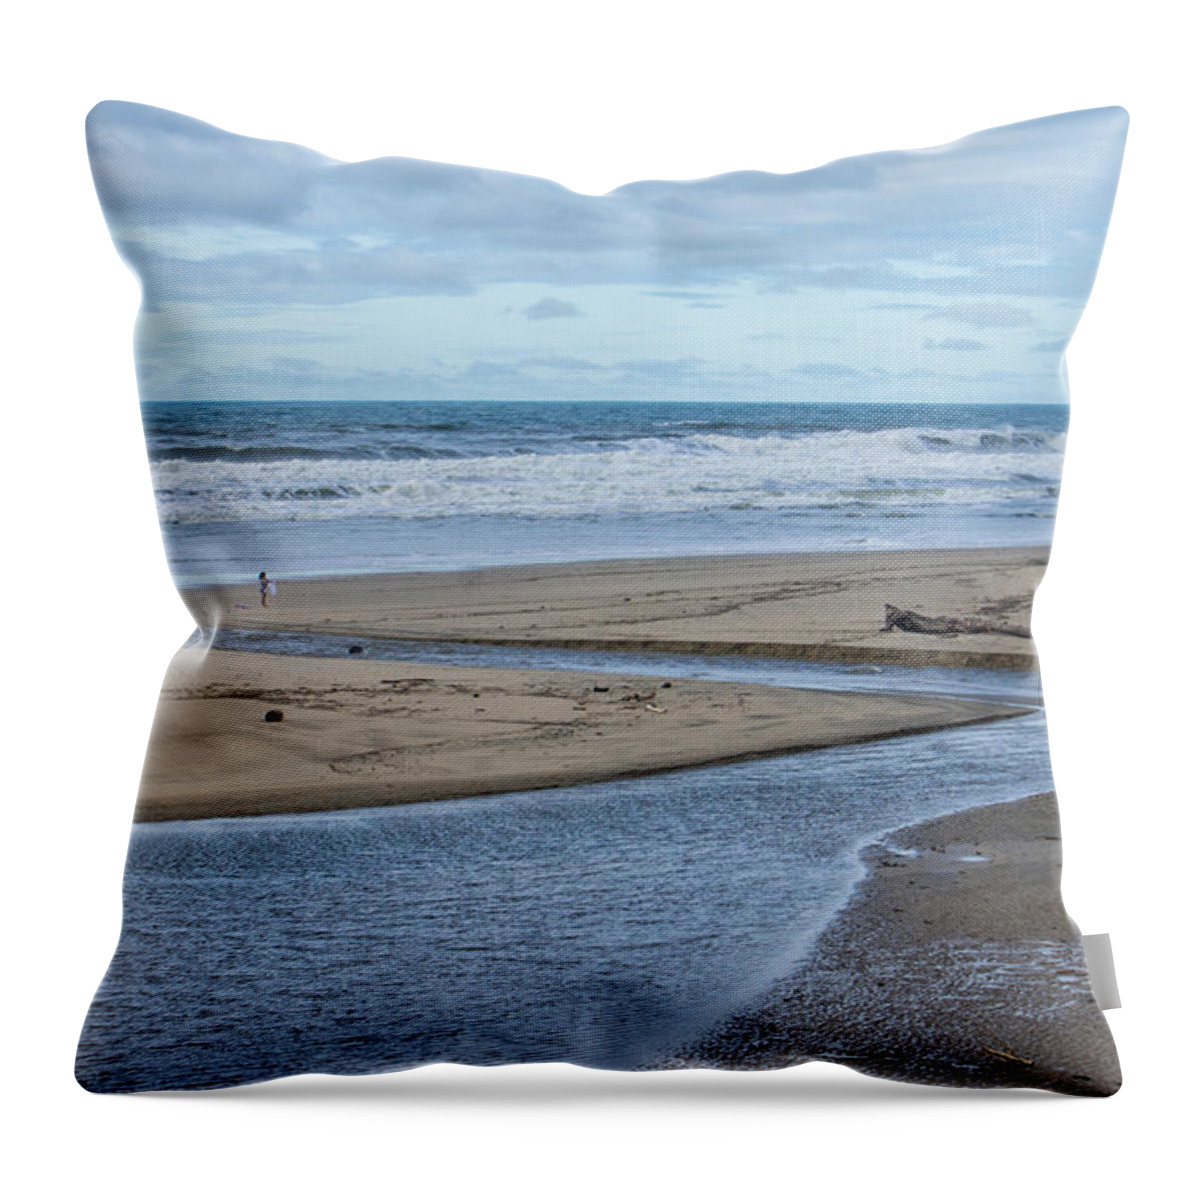 Pch Throw Pillow featuring the photograph Solitude by Weir Here And There